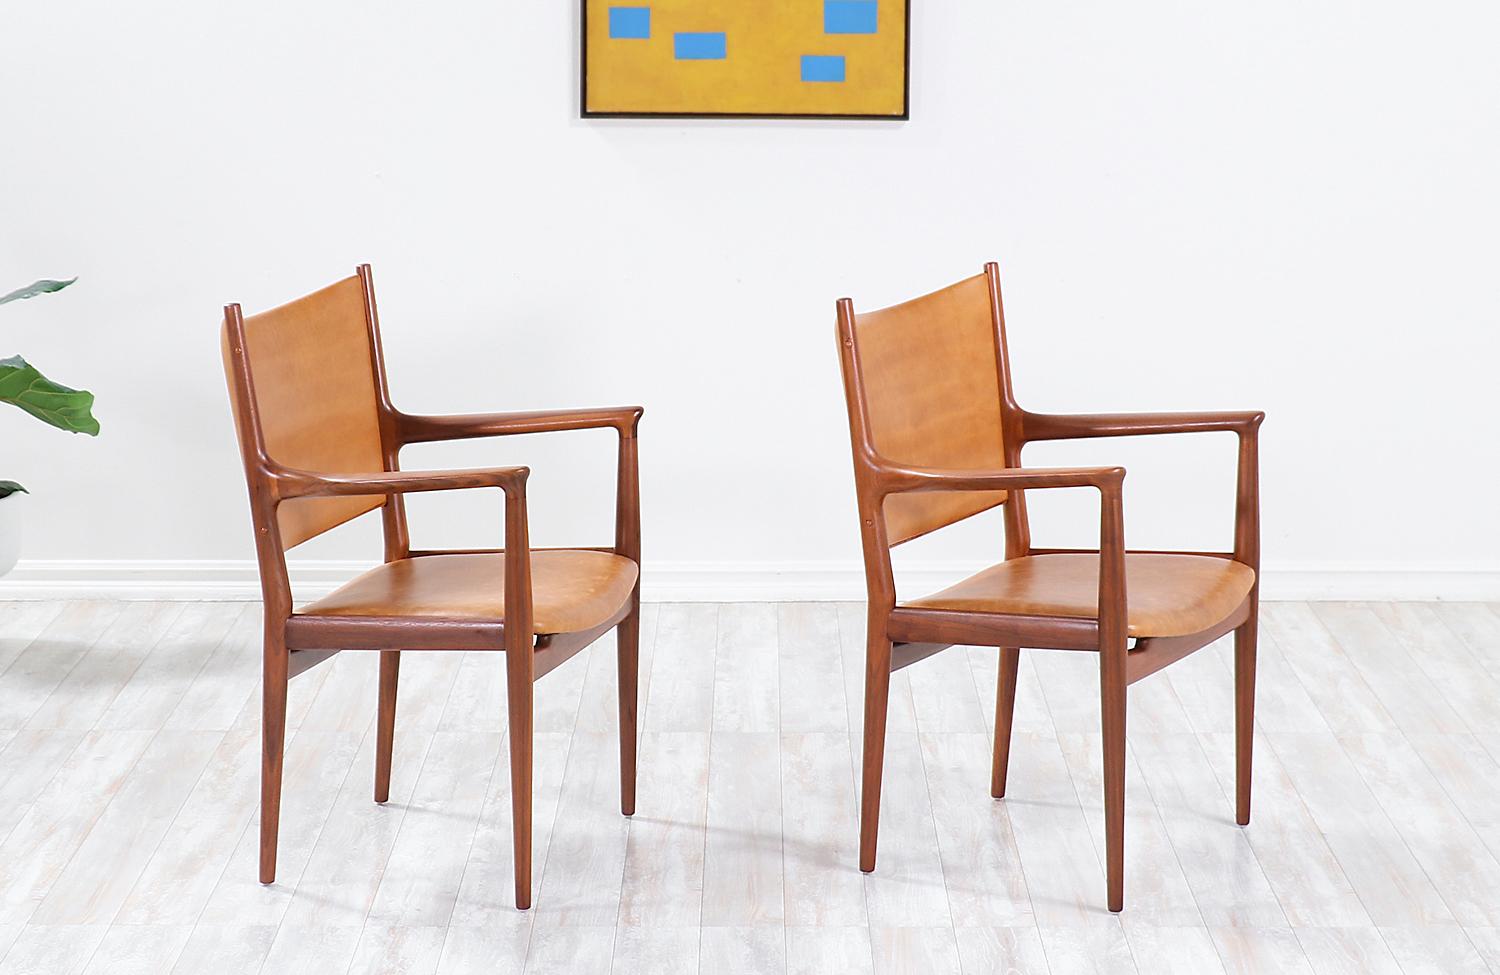 Pair of models JH-509 armchairs designed by iconic Danish architect Hans J. Wegner in collaboration with the famous workshop of Johannes Hansen in Denmark during the 1950s. Initially designed for conference and meeting rooms, these ergonomic chairs